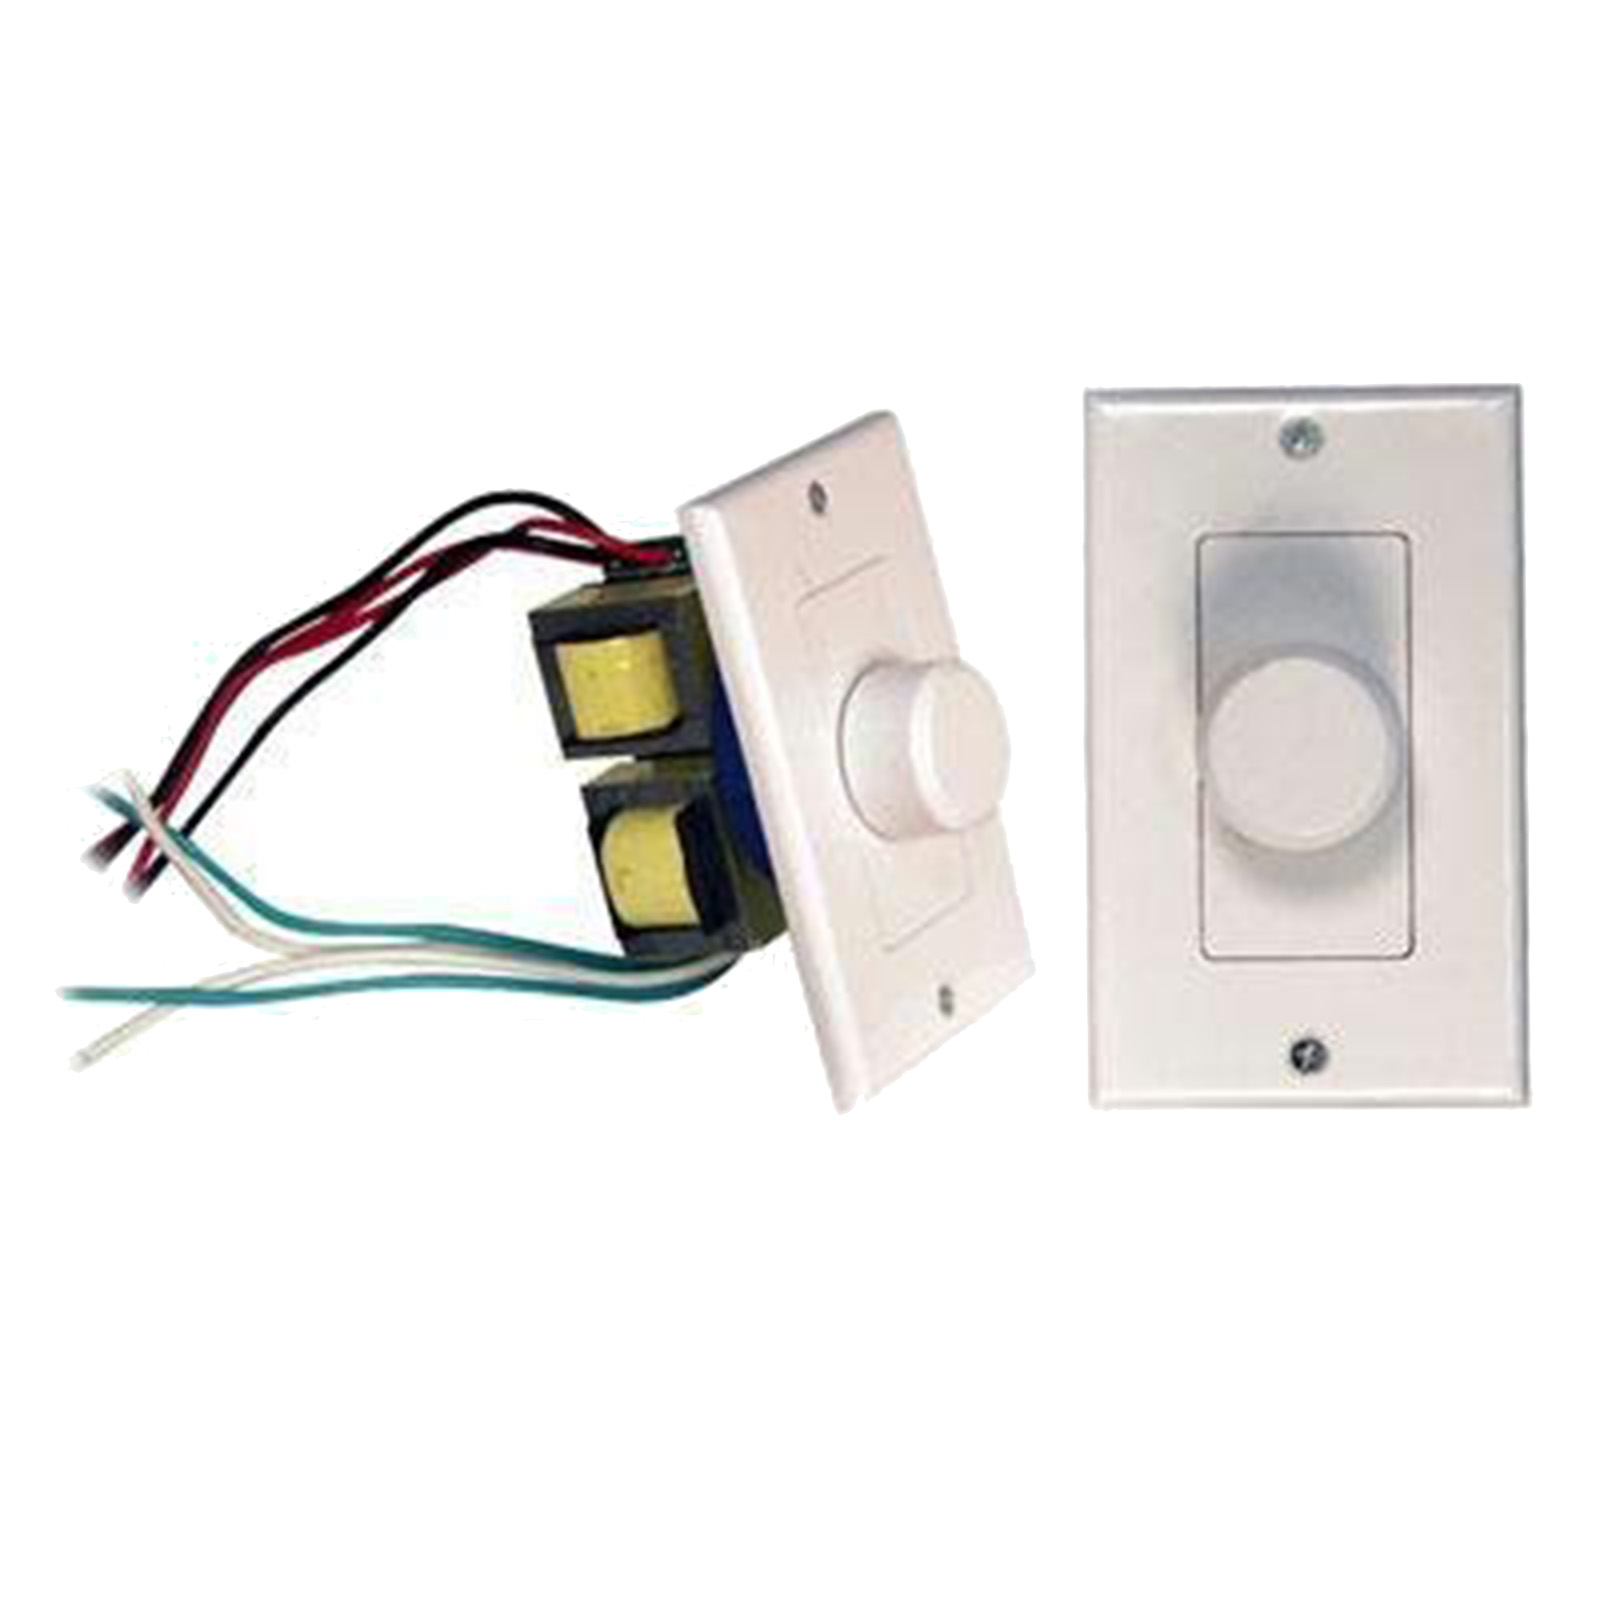 Pyle PVC1 Pyle Wall Plate Wall Mount Rotary Volume and Audio Speaker Control